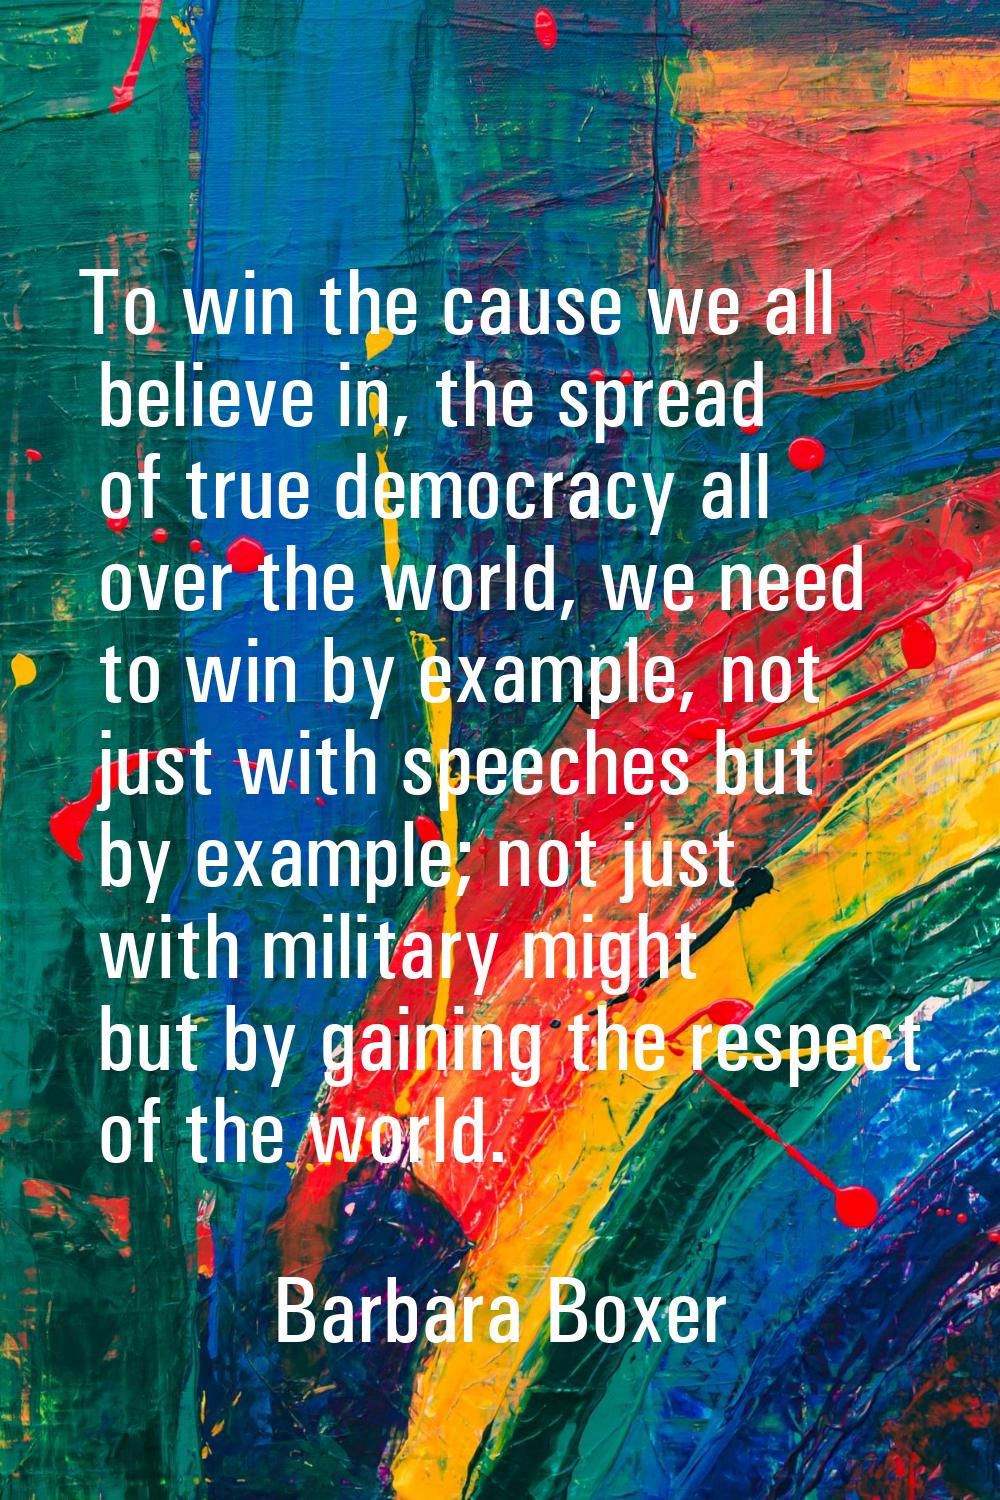 To win the cause we all believe in, the spread of true democracy all over the world, we need to win